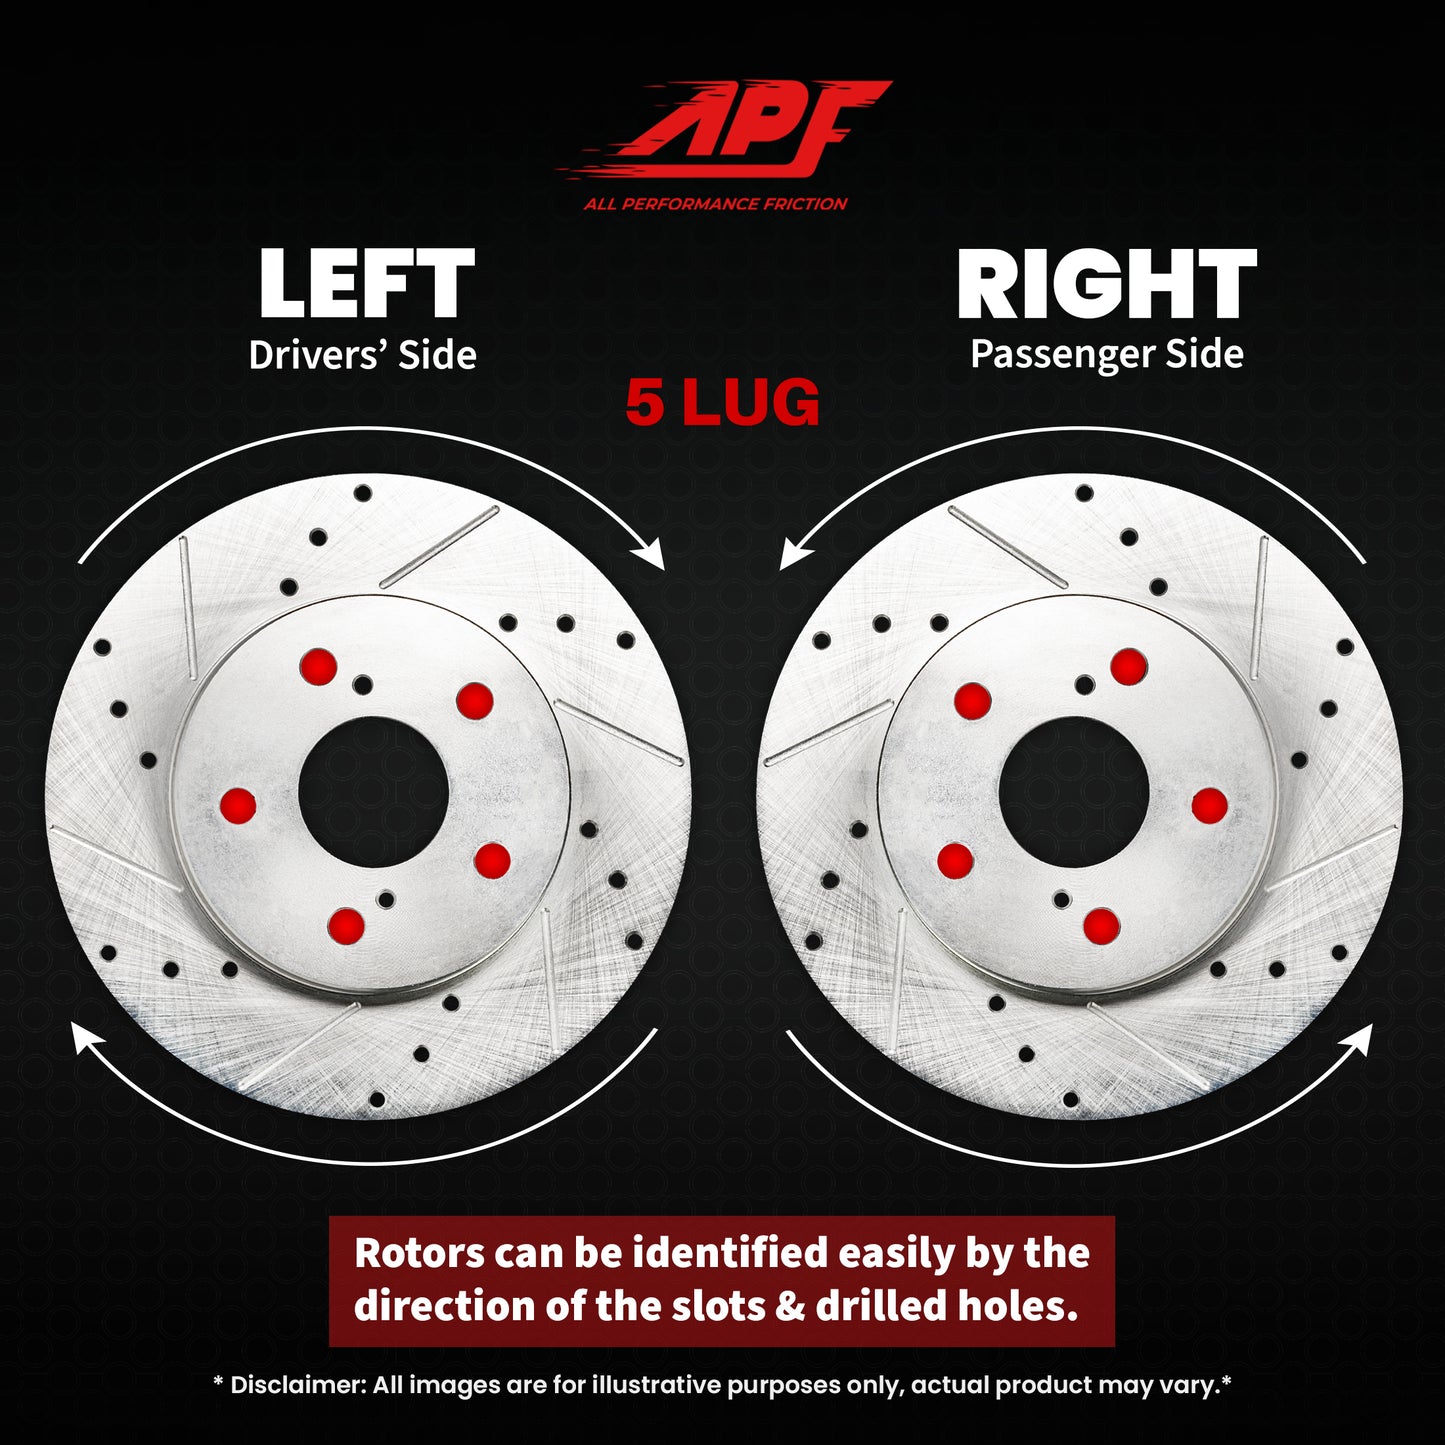 APF All Performance Friction Front Rotors compatible with Kia Forte Koup 2010-2013 Zinc Drilled Slotted Rotors | $93.28